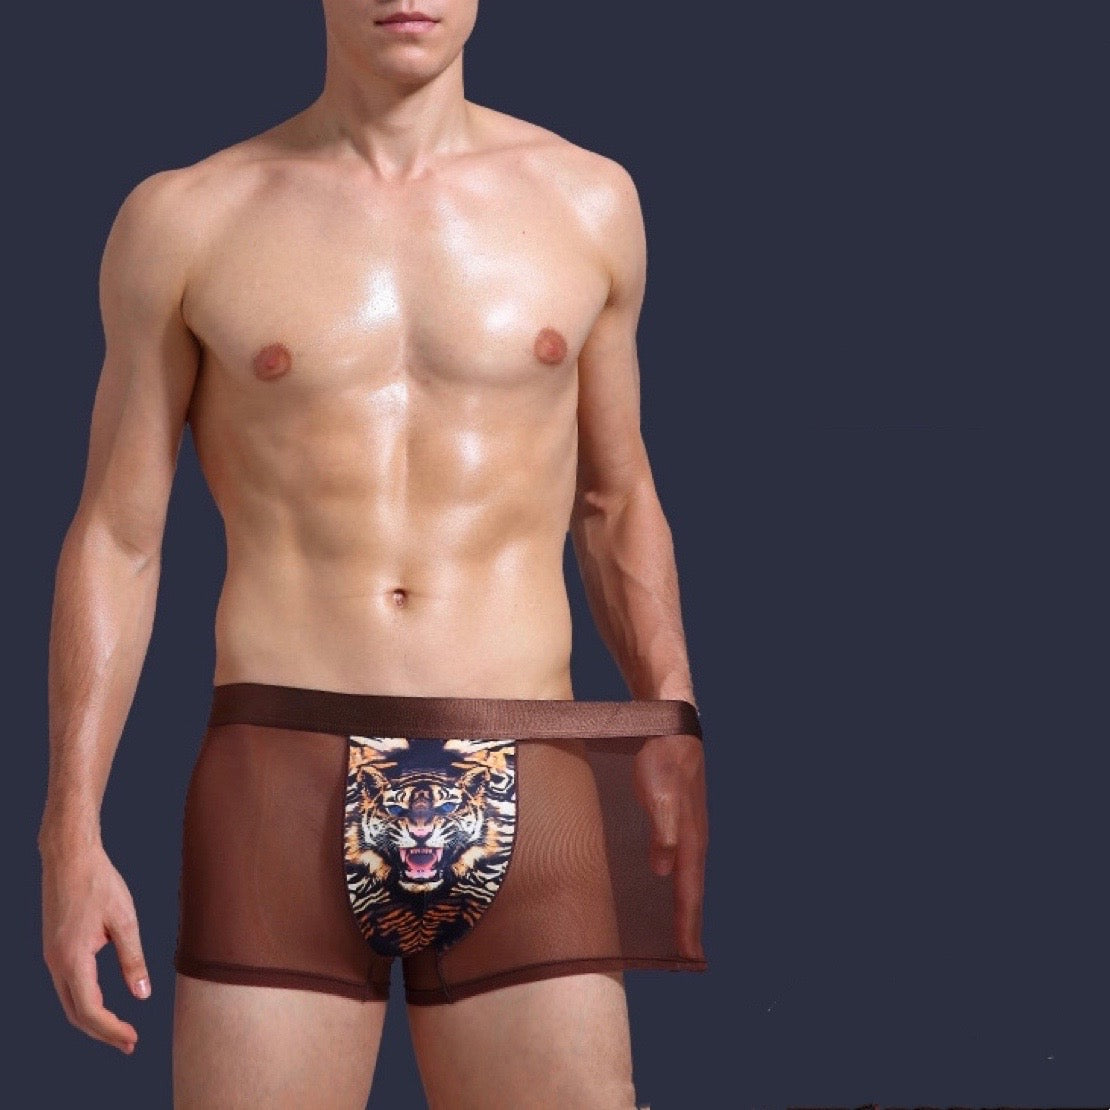 Men's Tiger Printed 3D Pouch  Mesh Trunks (6-Pack)